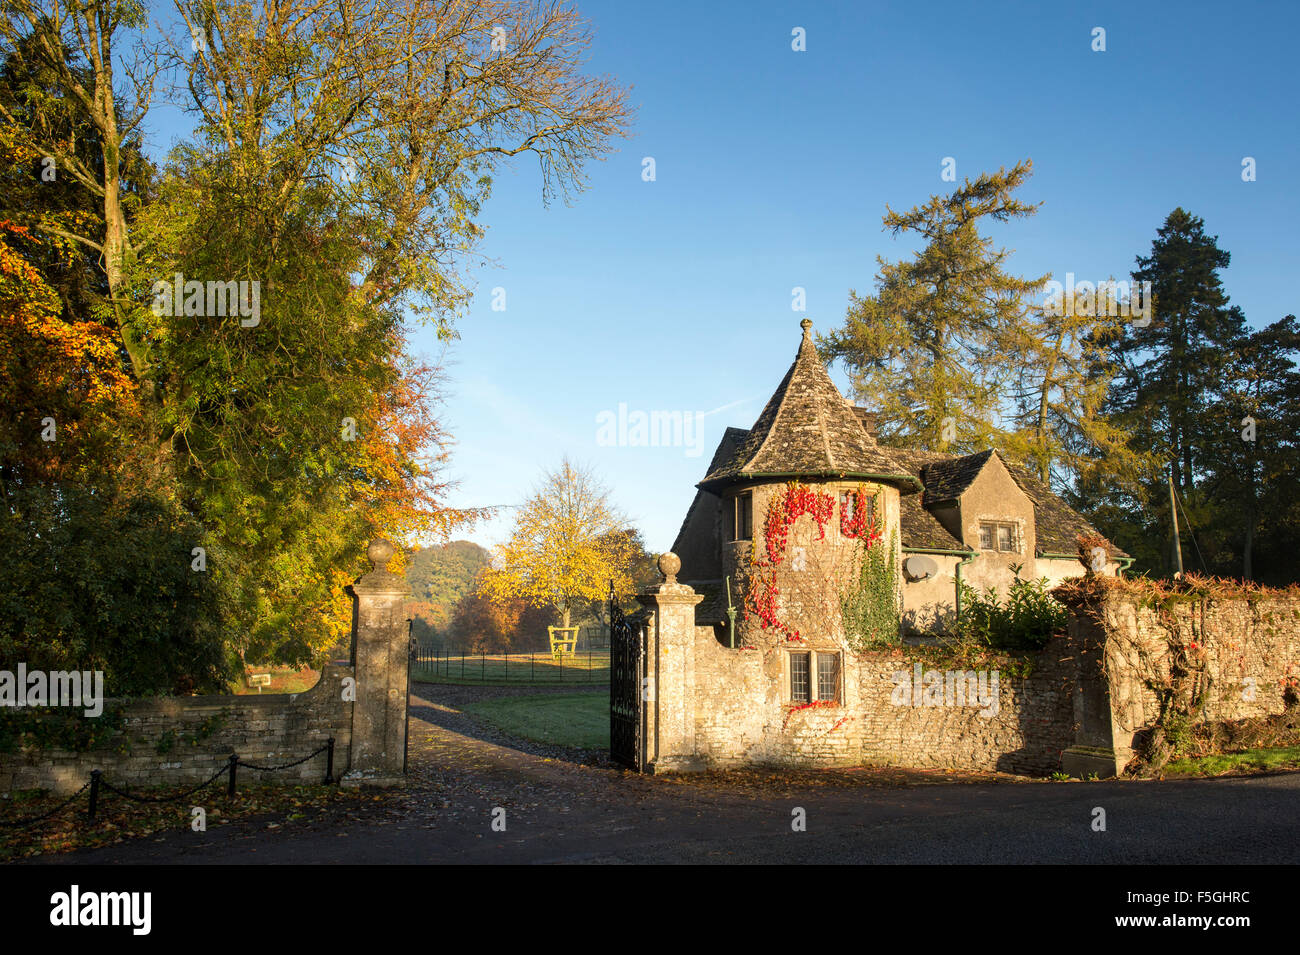 Stowell park estate gate house and beech trees with autumn foilage in the cotswold countryside. Gloucestershire, England. Stock Photo